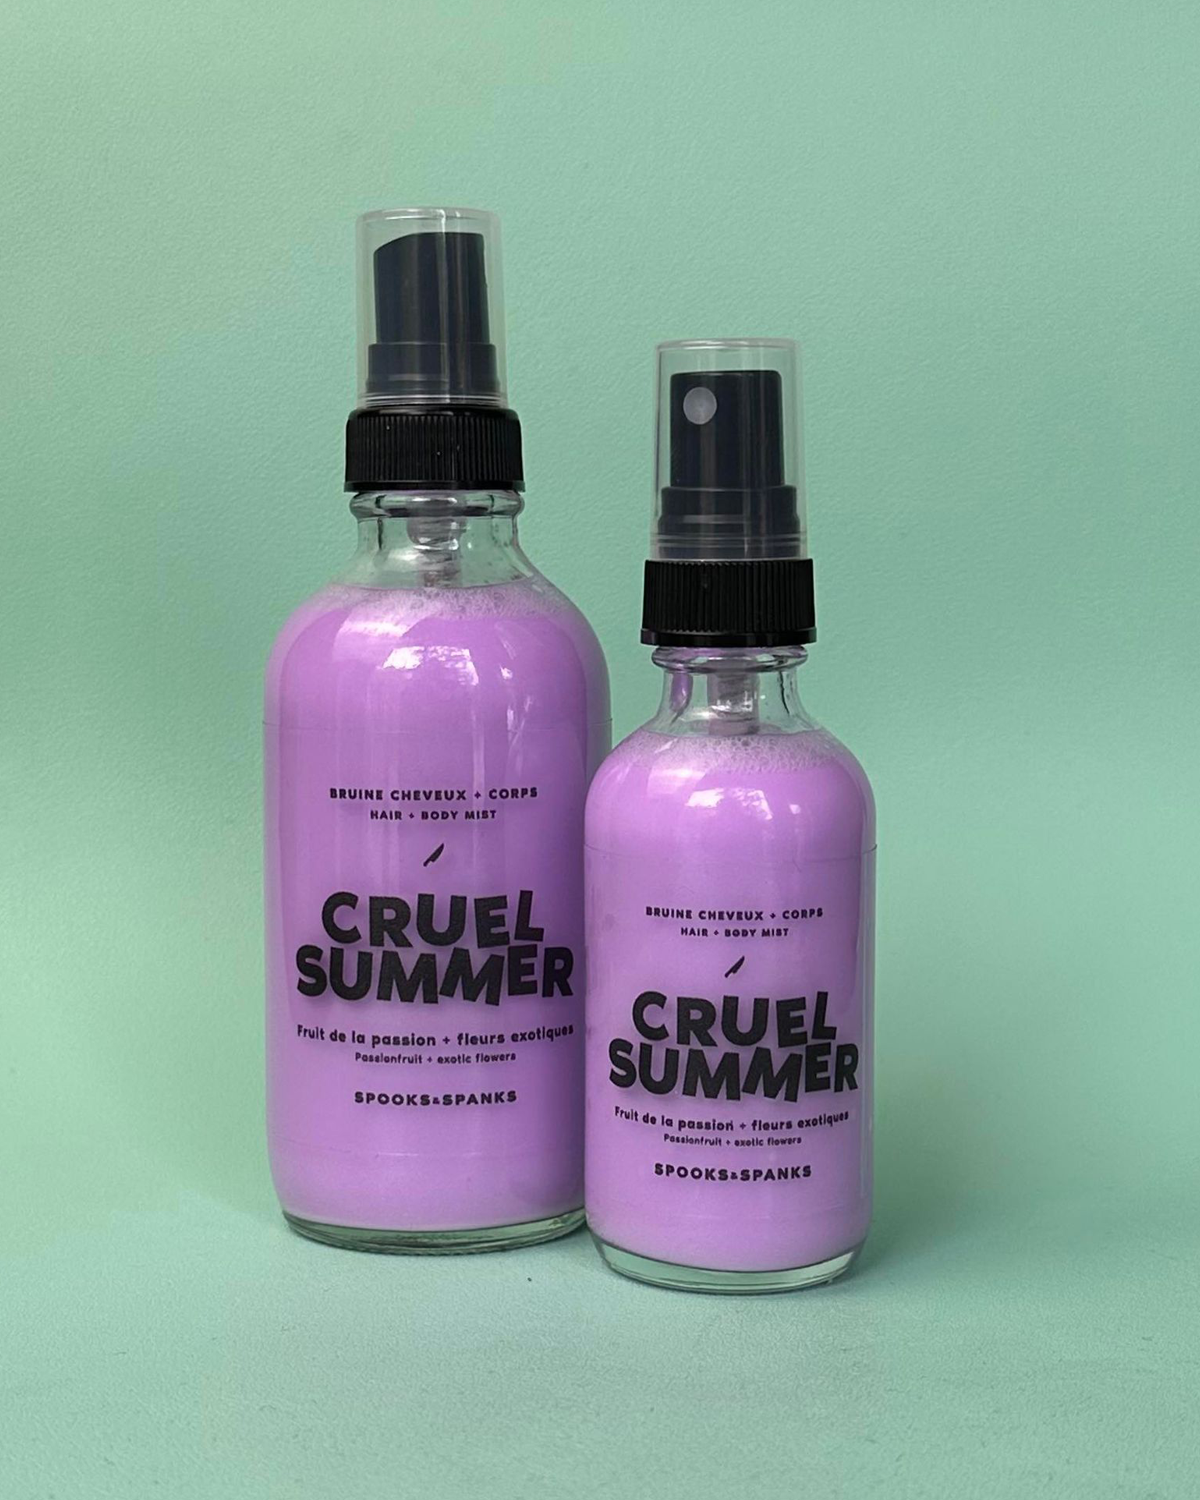 Cruel Summer - Passionfruit + Exotic Flowers Body and Hair Mist